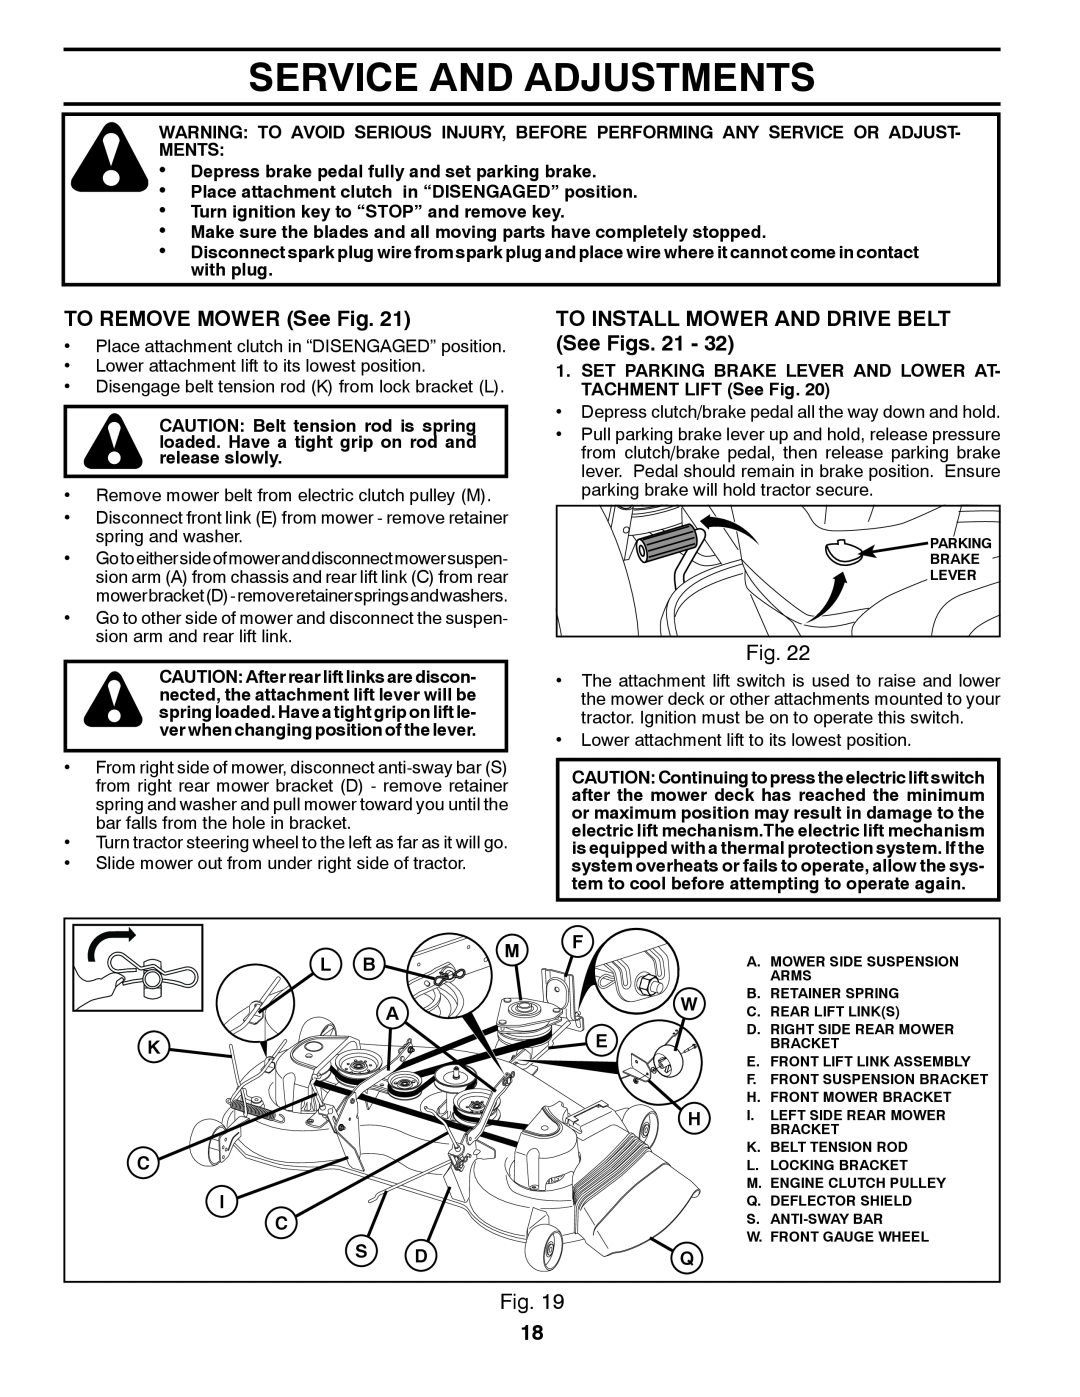 Husqvarna 96045002202 Service And Adjustments, TO REMOVE MOWER See Fig, TO INSTALL MOWER AND DRIVE BELT See Figs. 21 